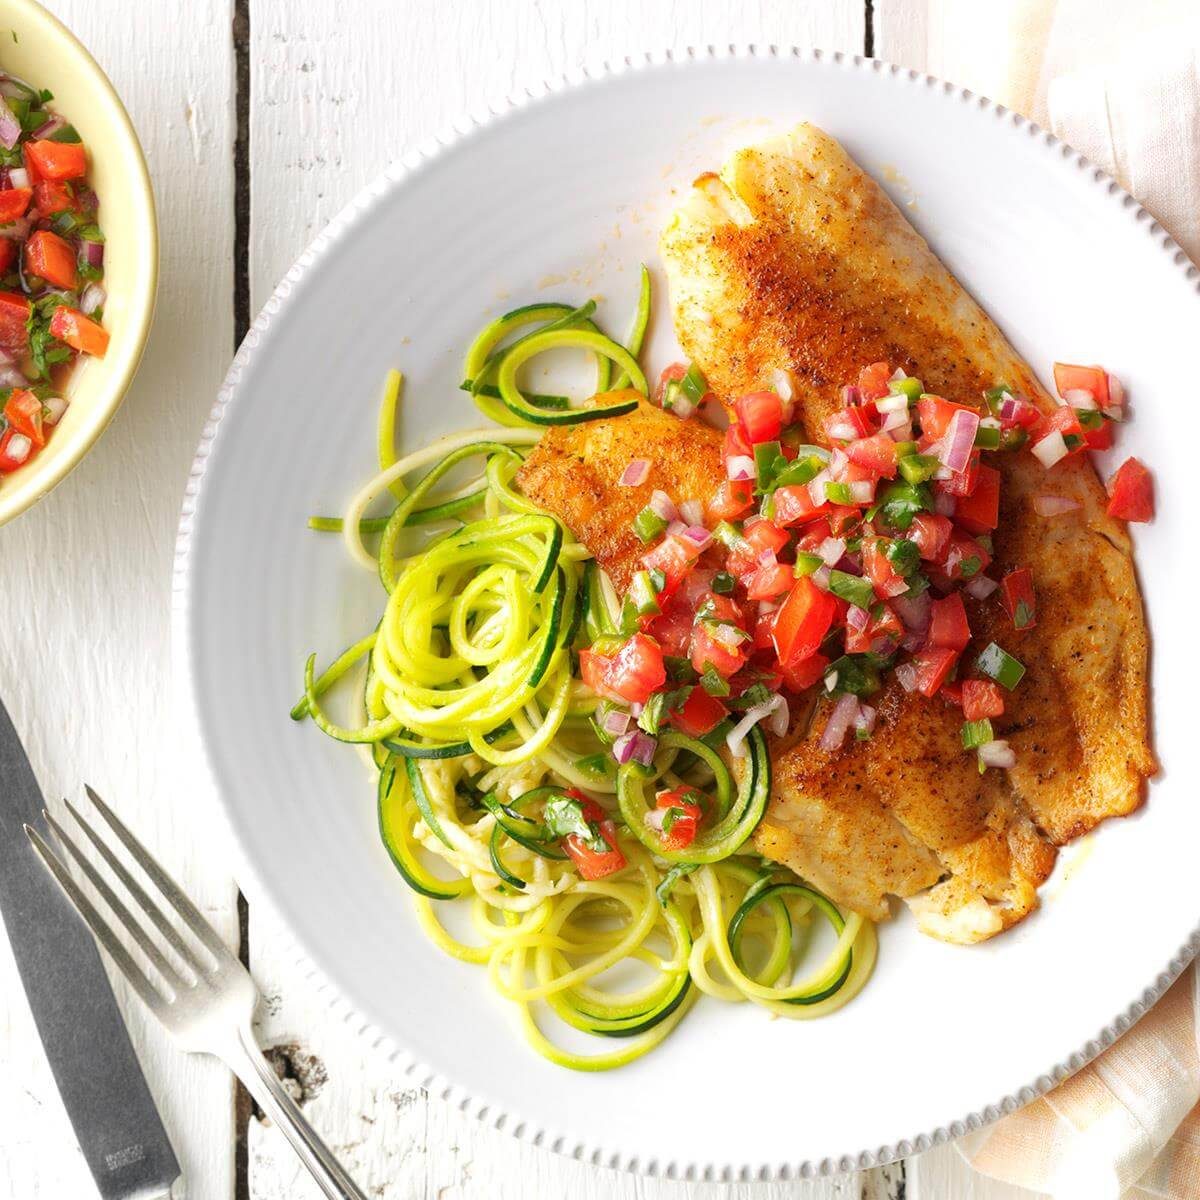 Blackened Tilapia with Zucchini Noodles Recipe | Taste of Home